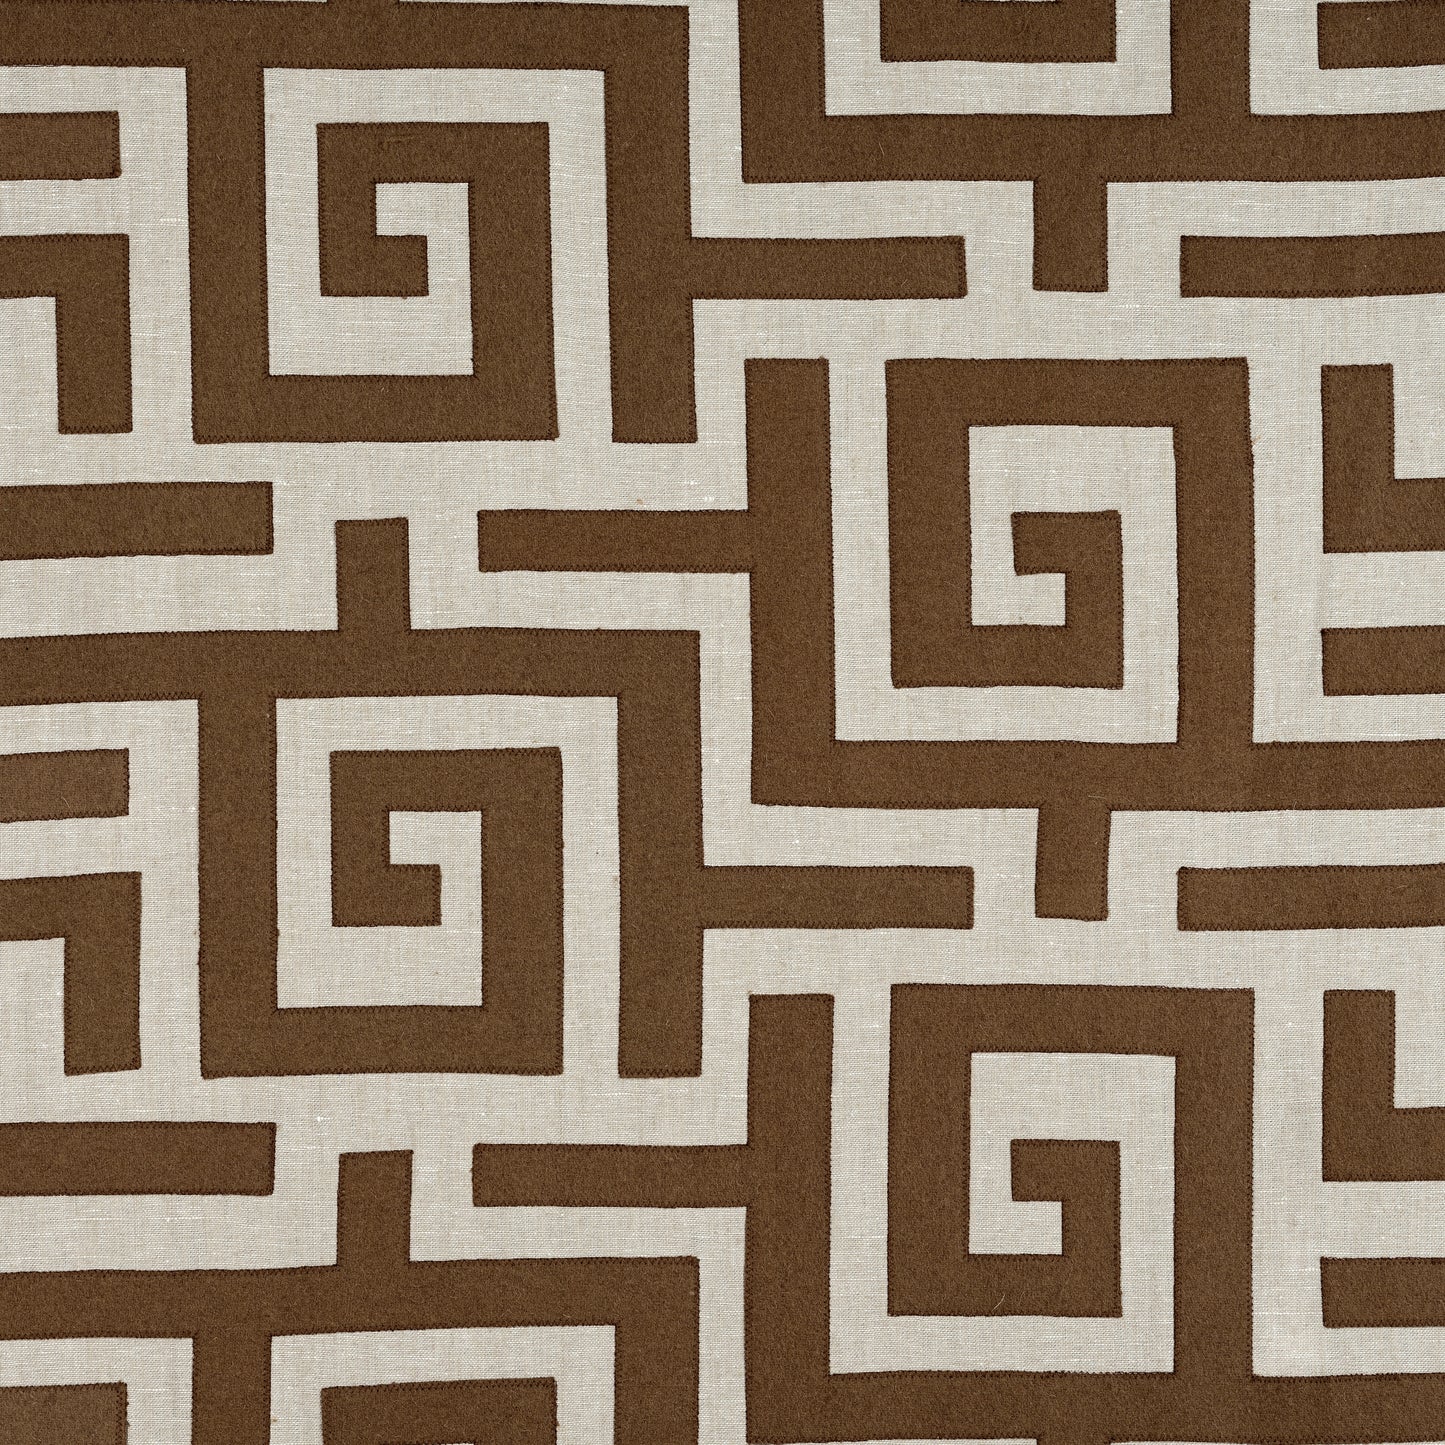 Purchase Thibaut Fabric Pattern number W713226 pattern name Tulum Applique color Brown on Natural